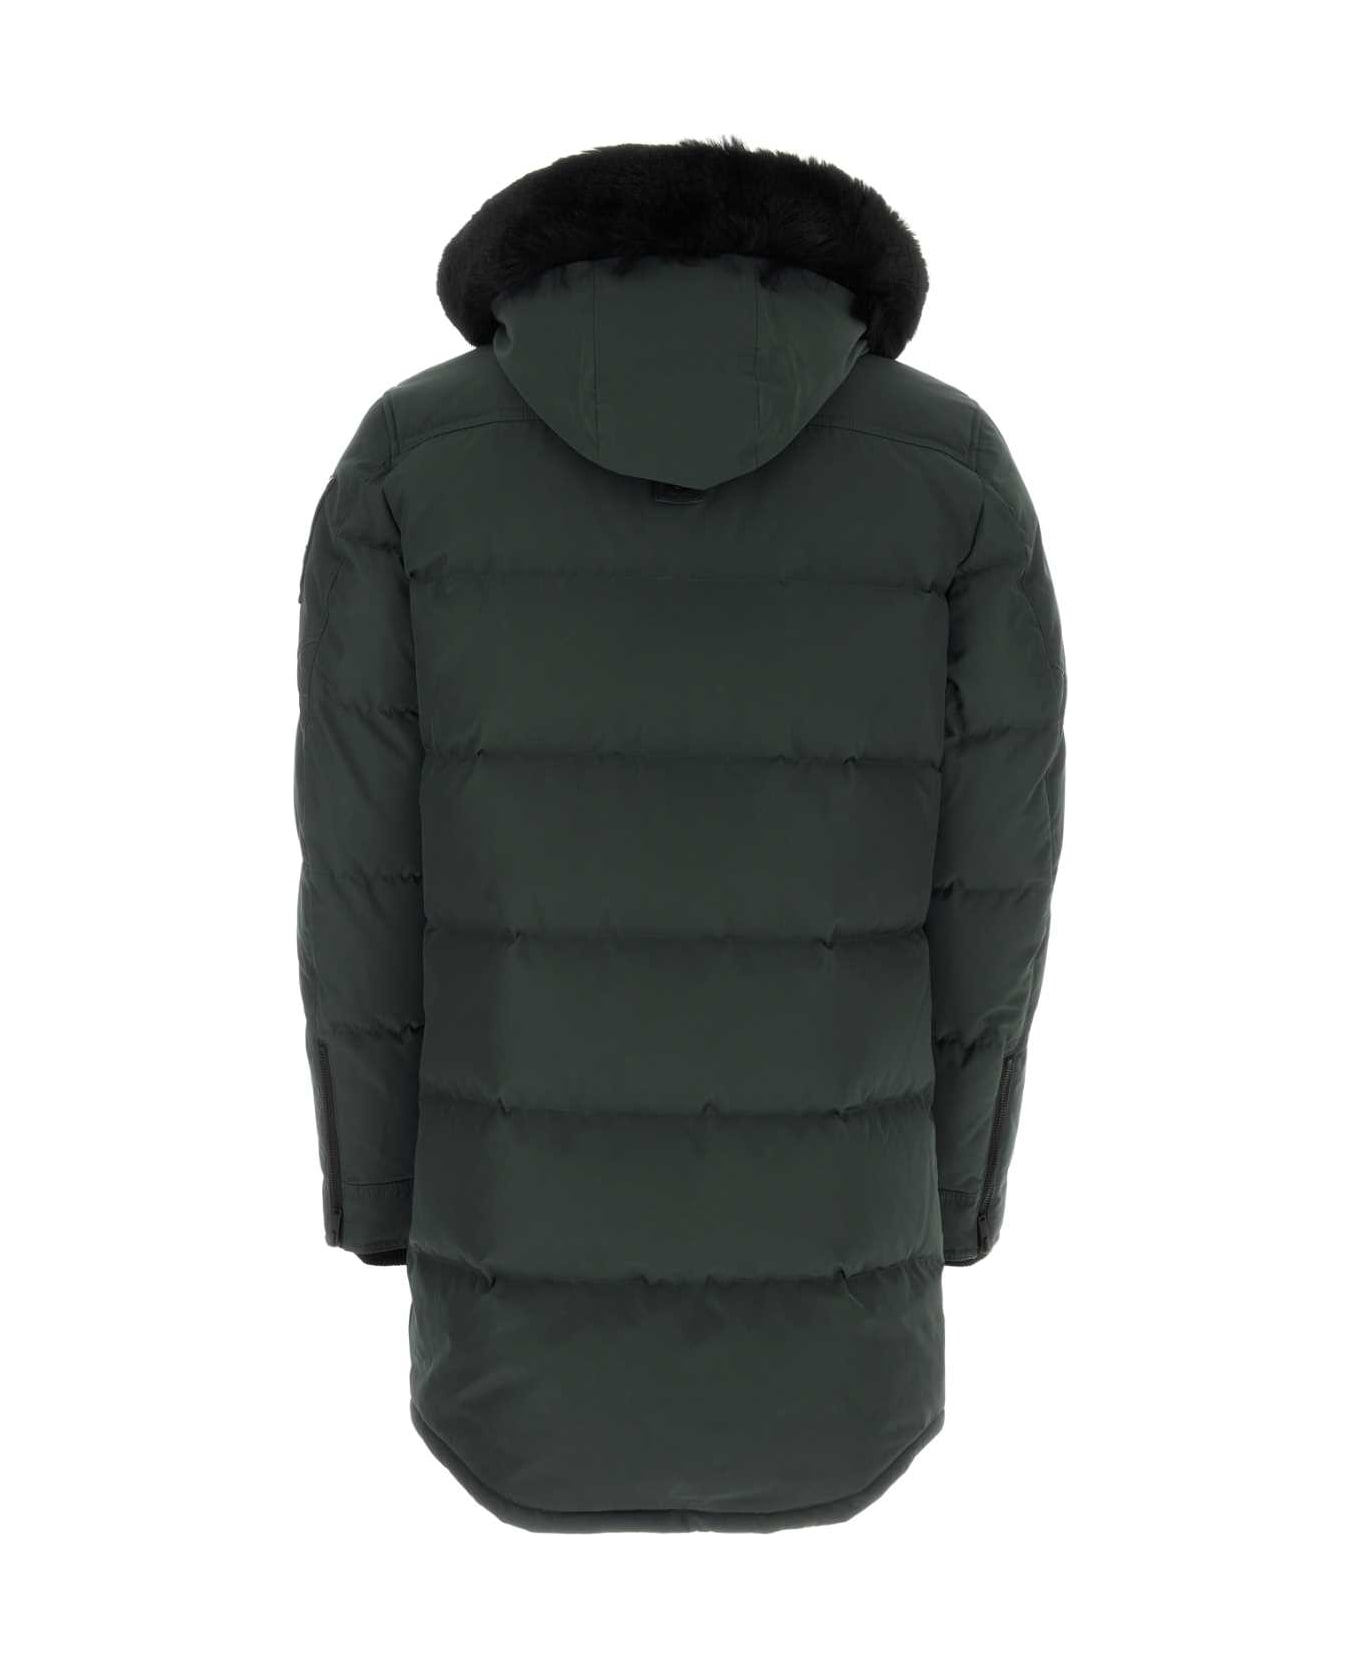 Moose Knuckles Dark Green Polyester Down Jacket - FOREST HILL